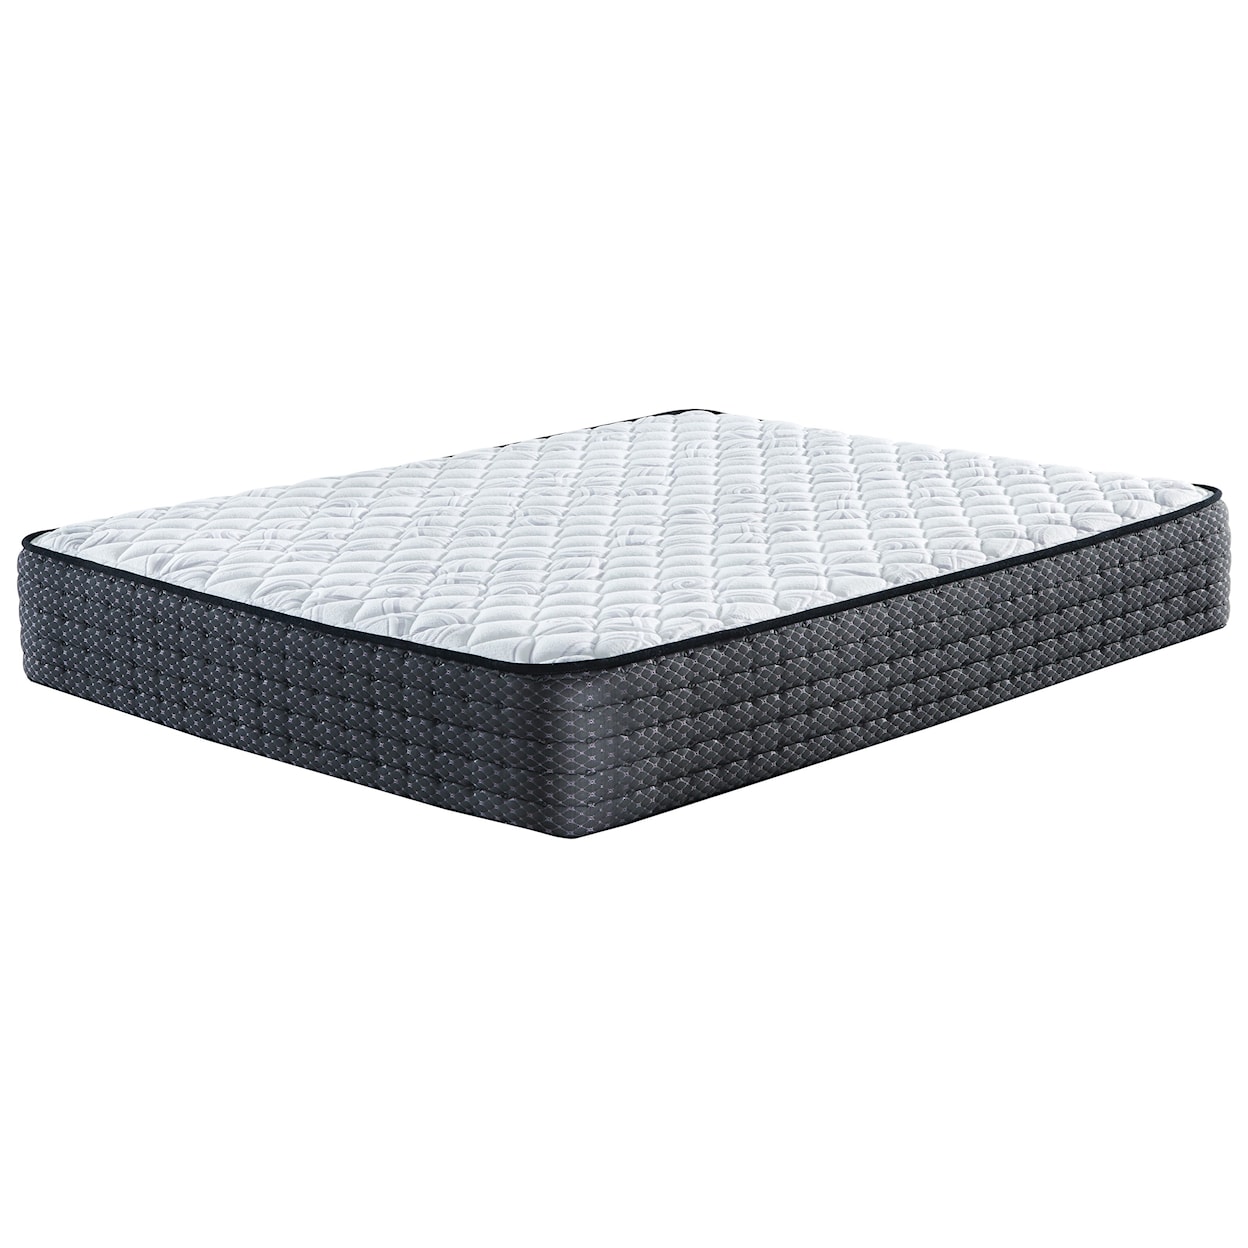 Sierra Sleep M625 Limited Edition Firm Twin 11" Firm Pocketed Coil Mattress